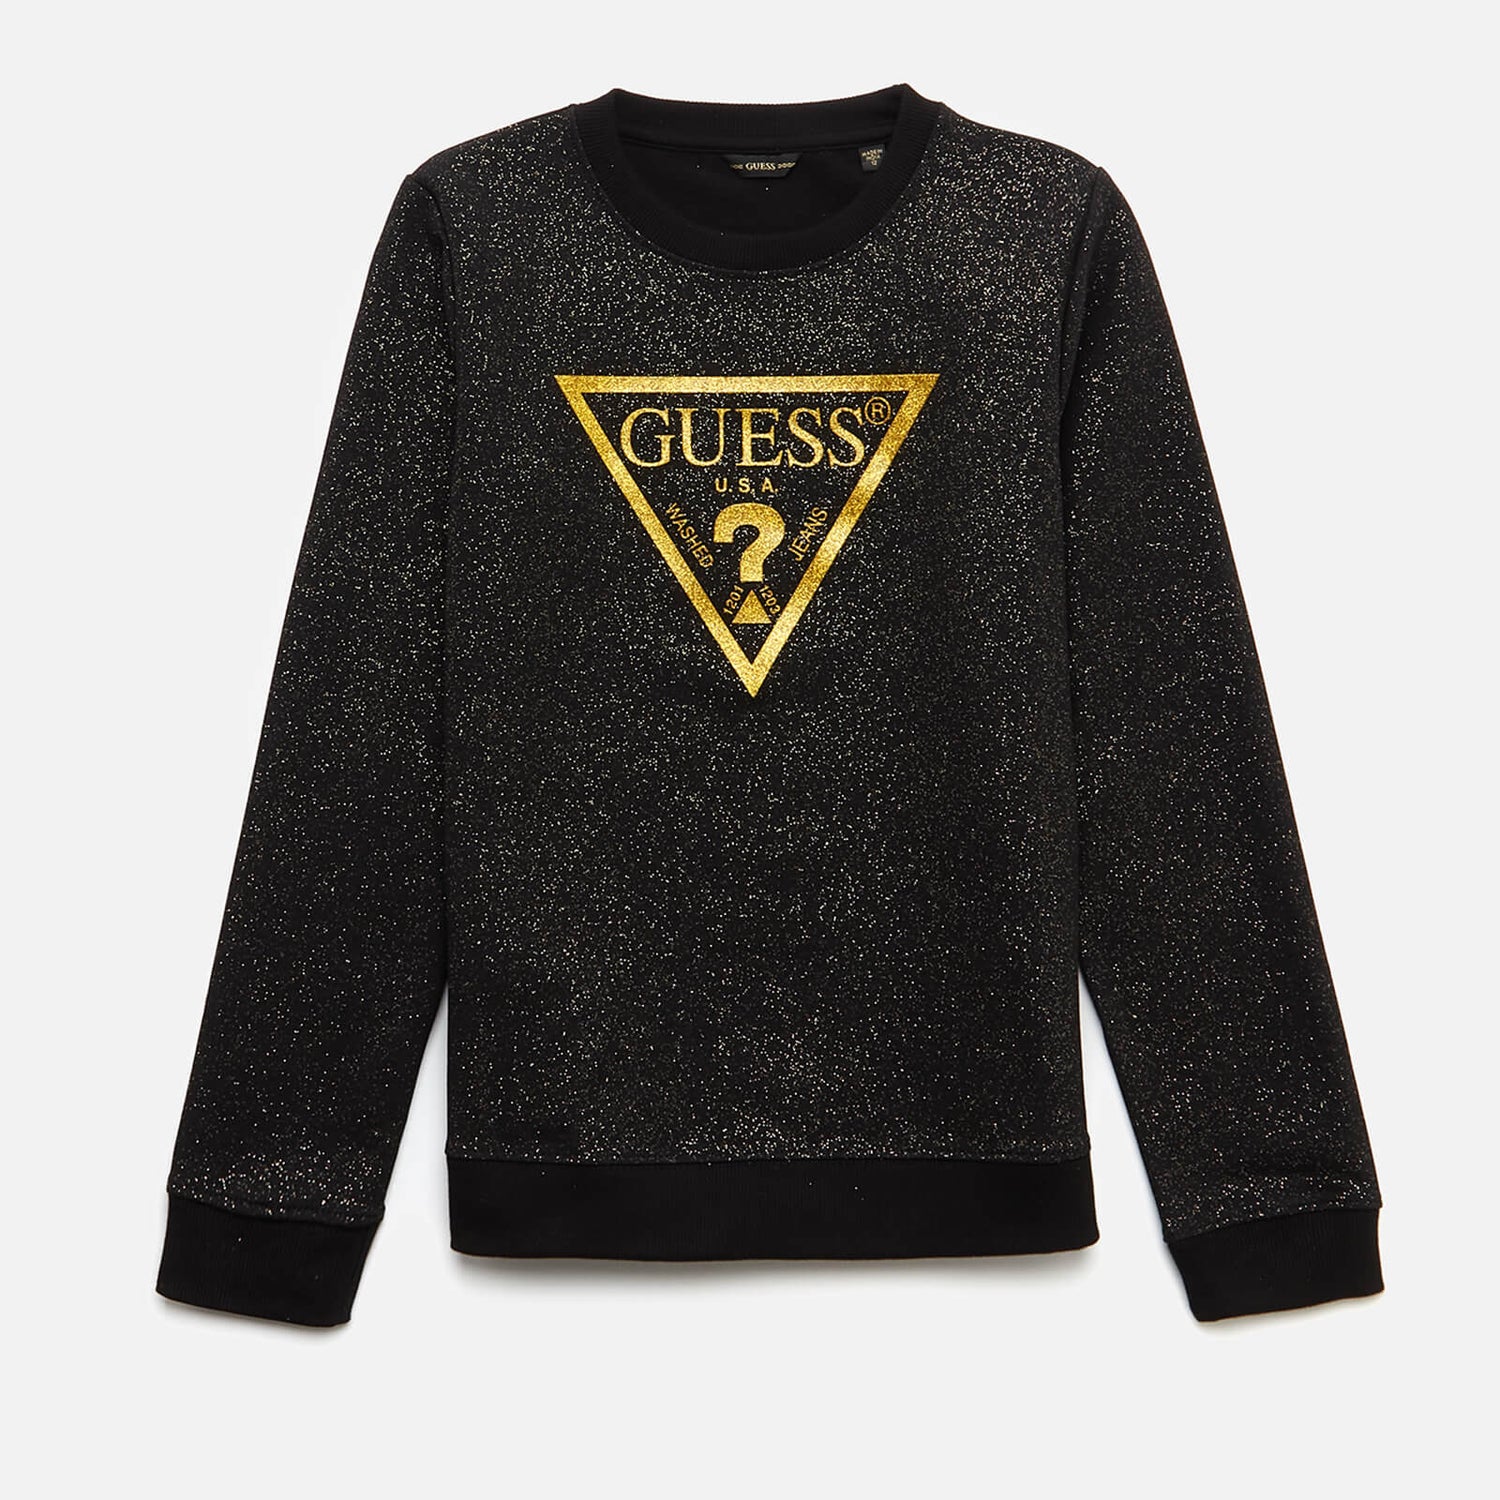 Guess Girls' Sparkly Long Sleeved Sweatshirt - Black - 12 Years